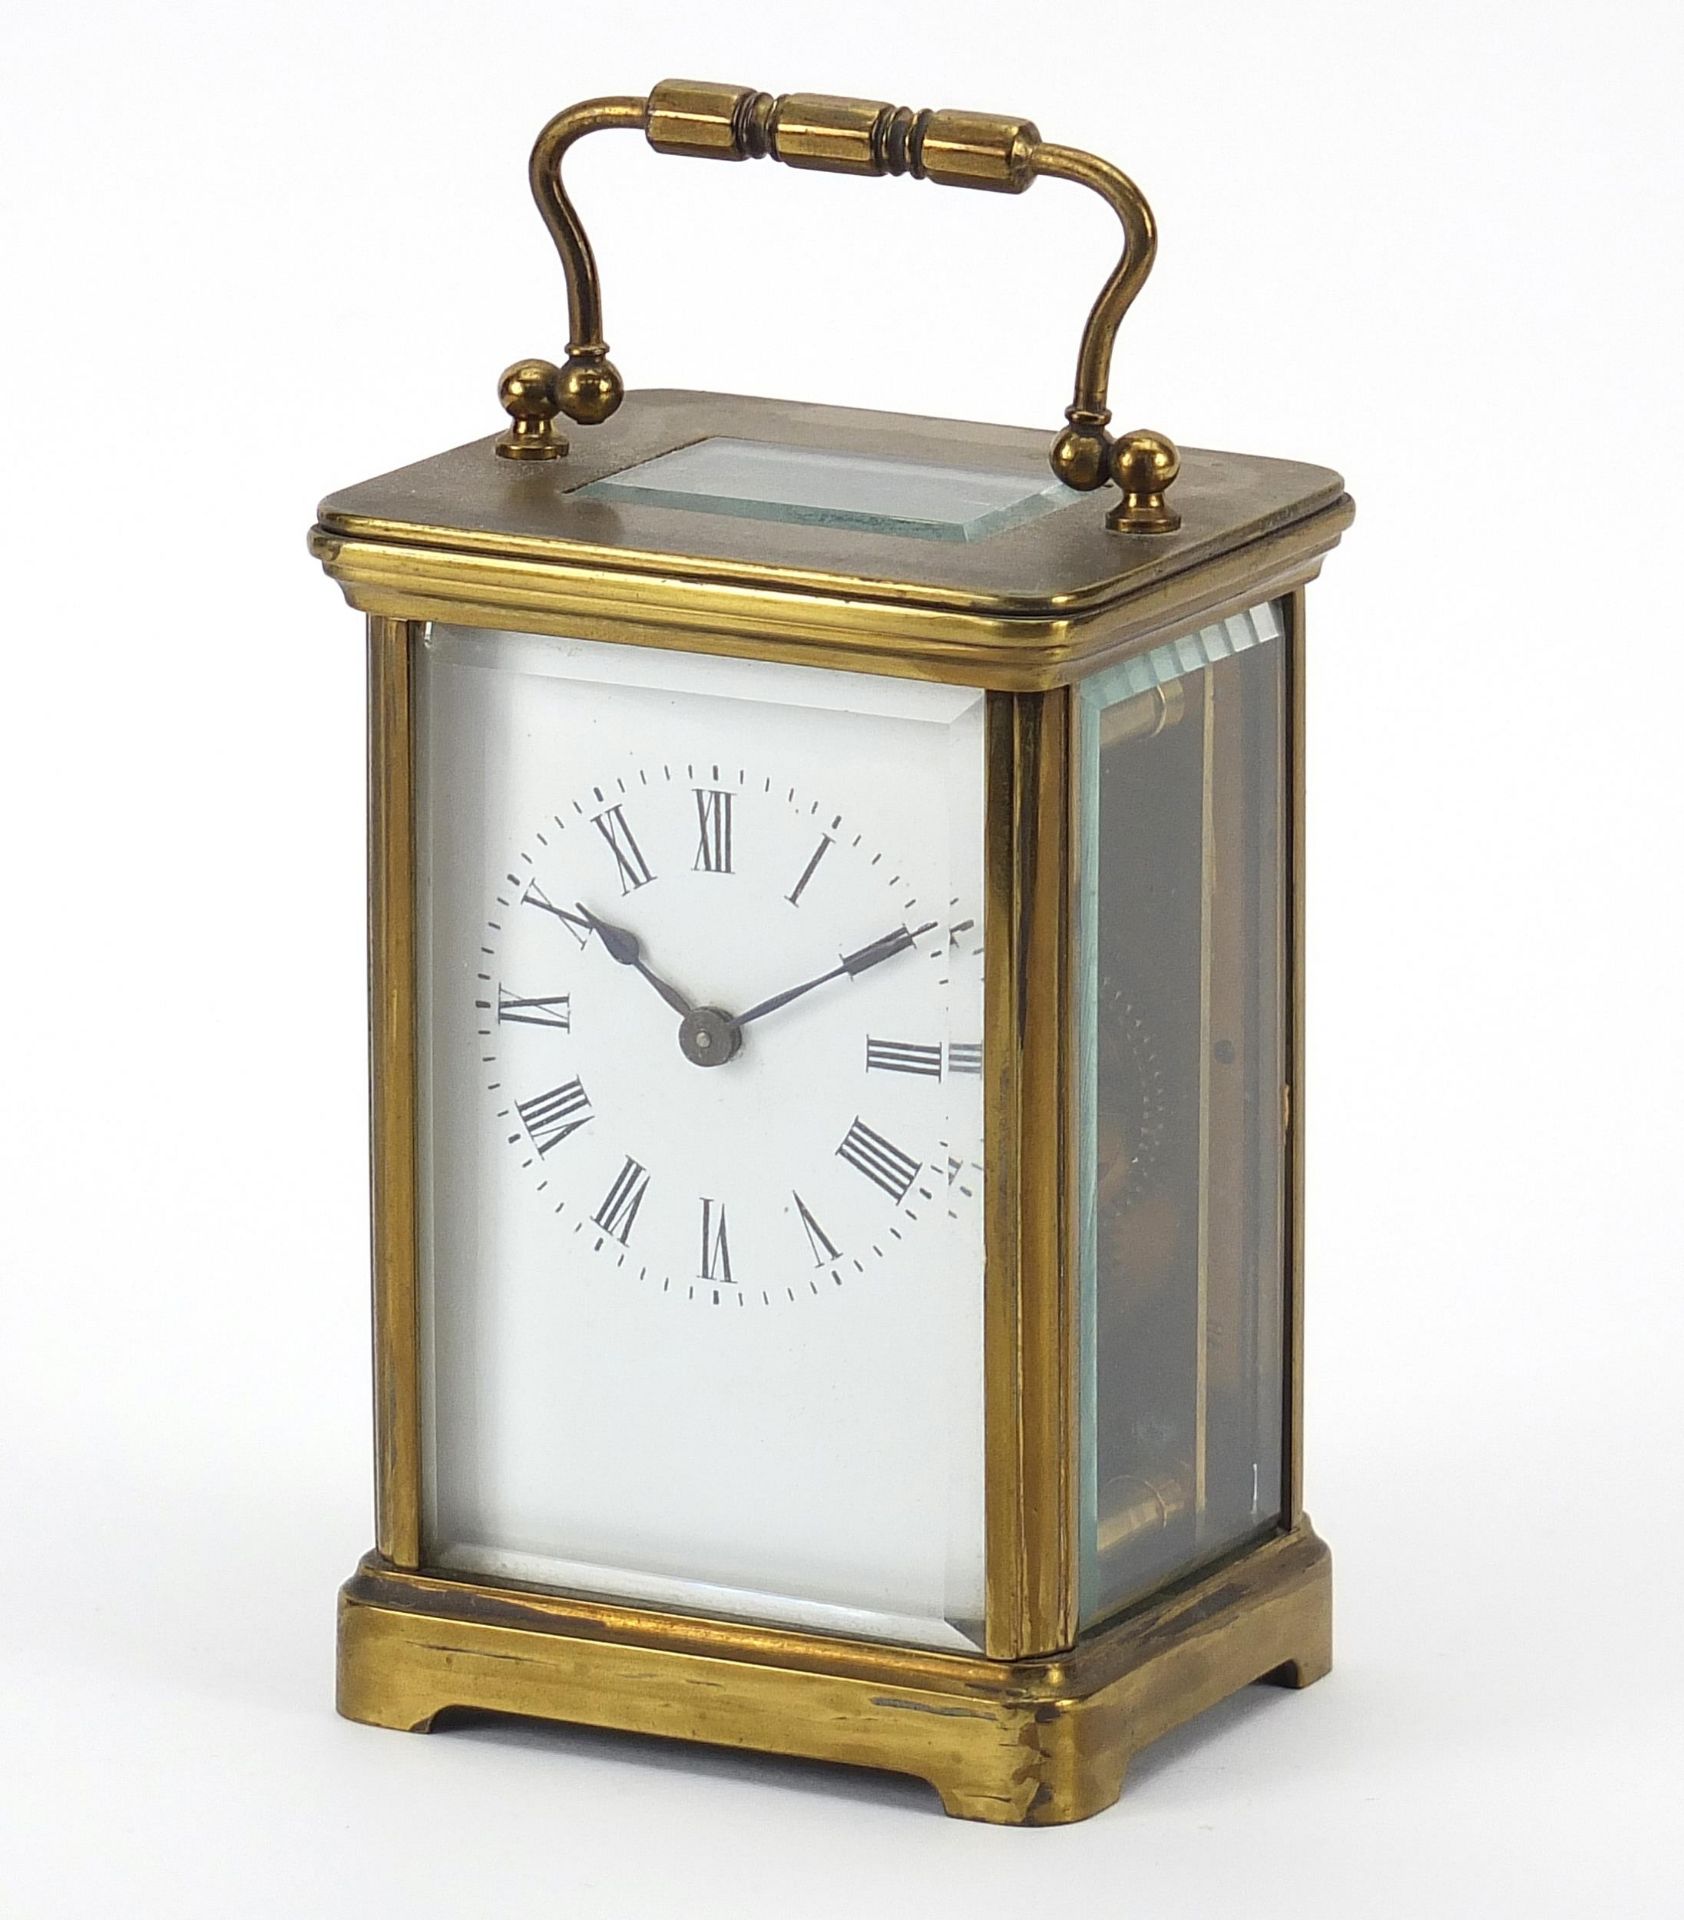 Brass cased carriage clock with enamelled dial and Roman numerals, 11cm high